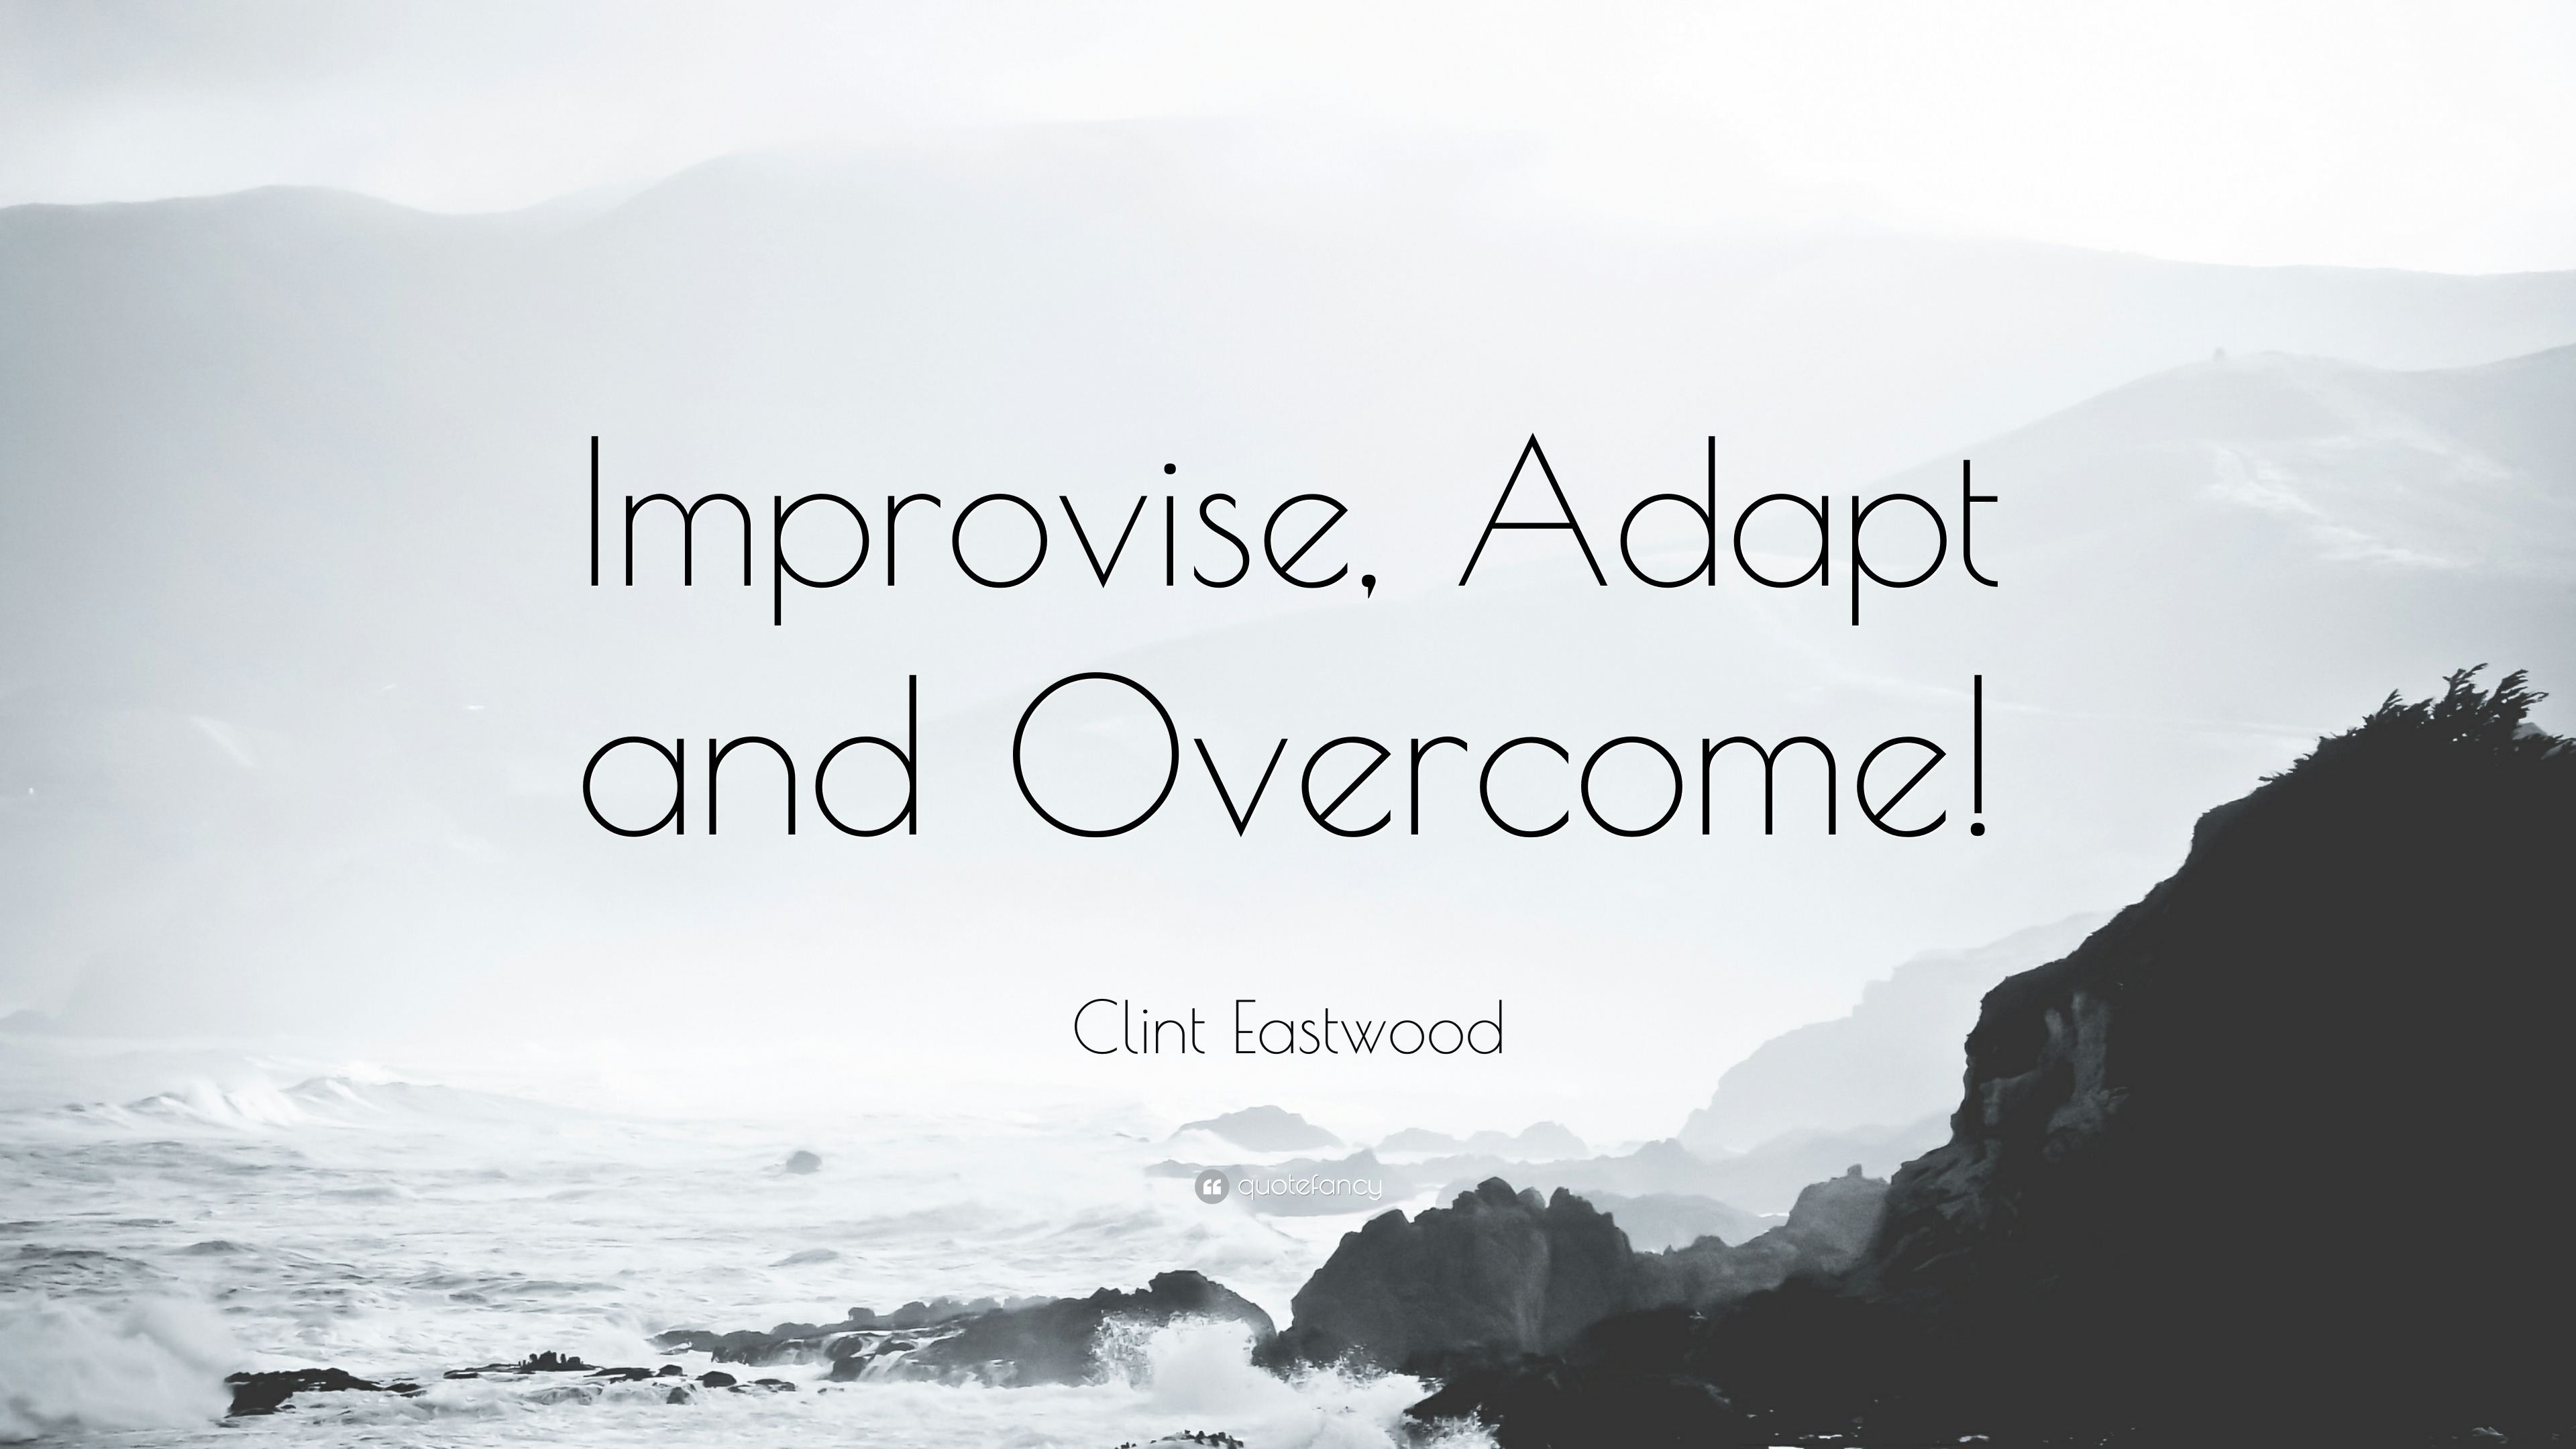 Clint Eastwood Quote: “Improvise, Adapt and Overcome!”